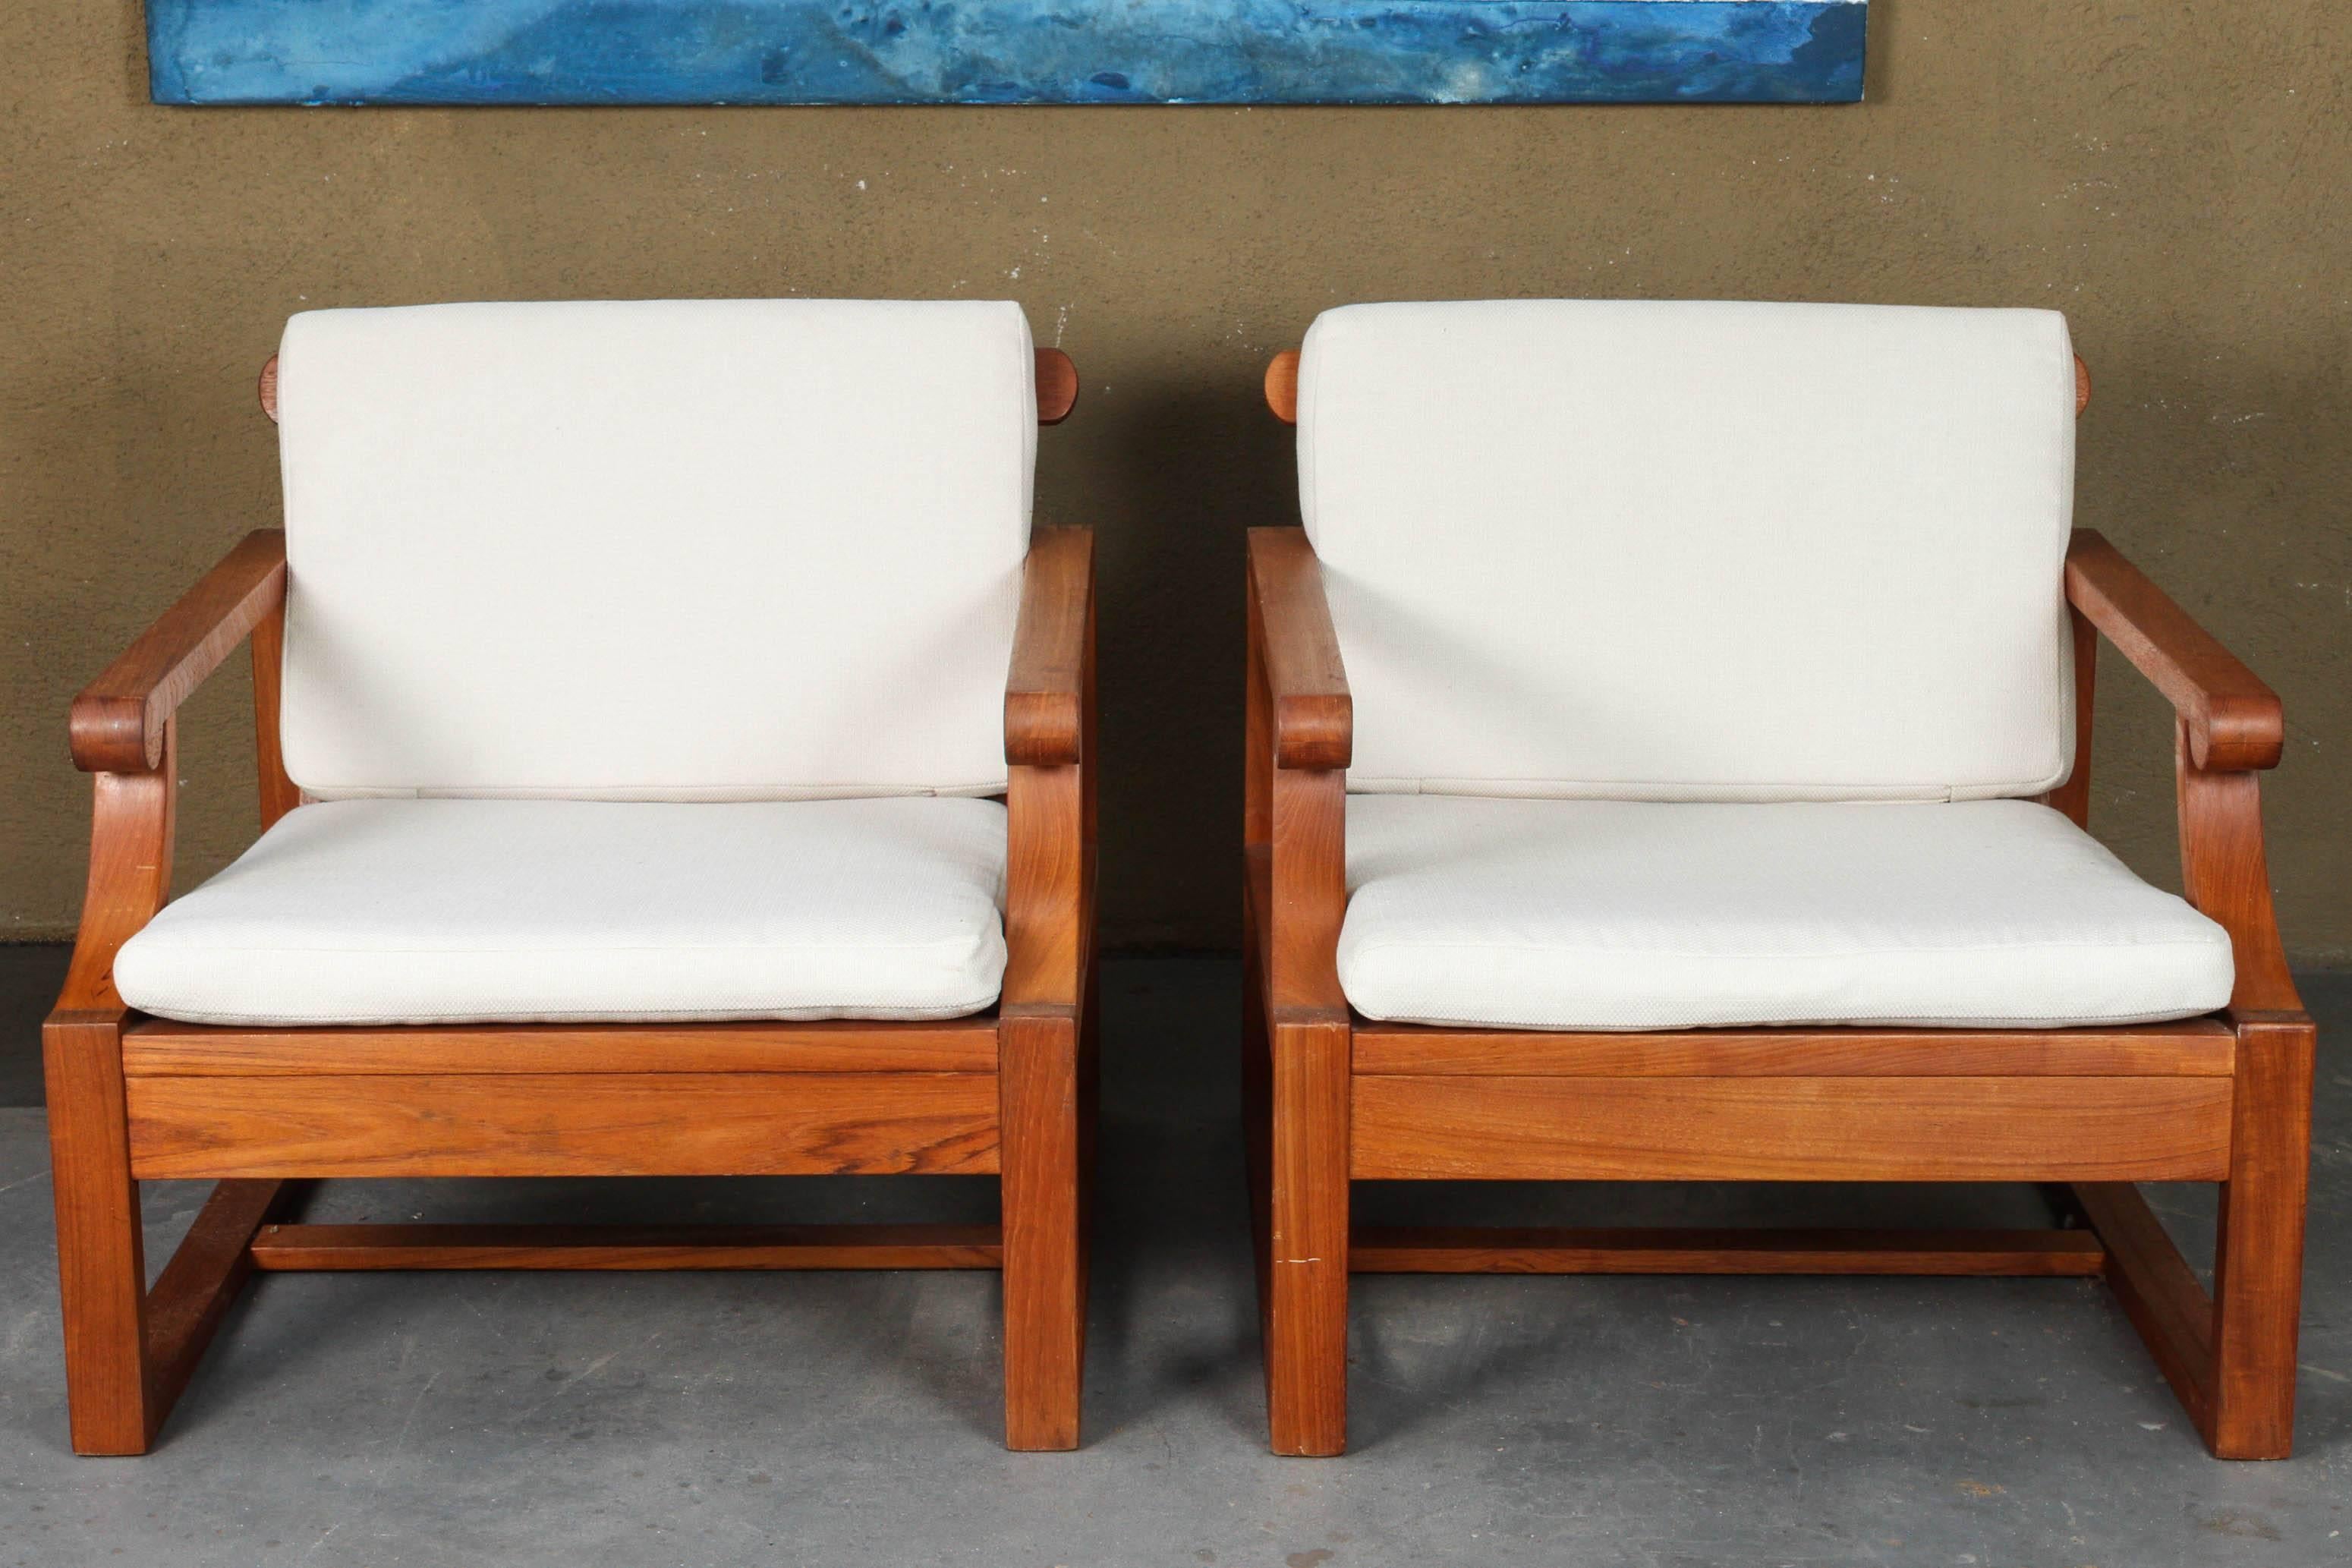 Spectacular pair of lounge chairs. Beautifully designed for both look and comfort. Could be used indoors and out. Rich warm teak base with white seat and back cushions.

